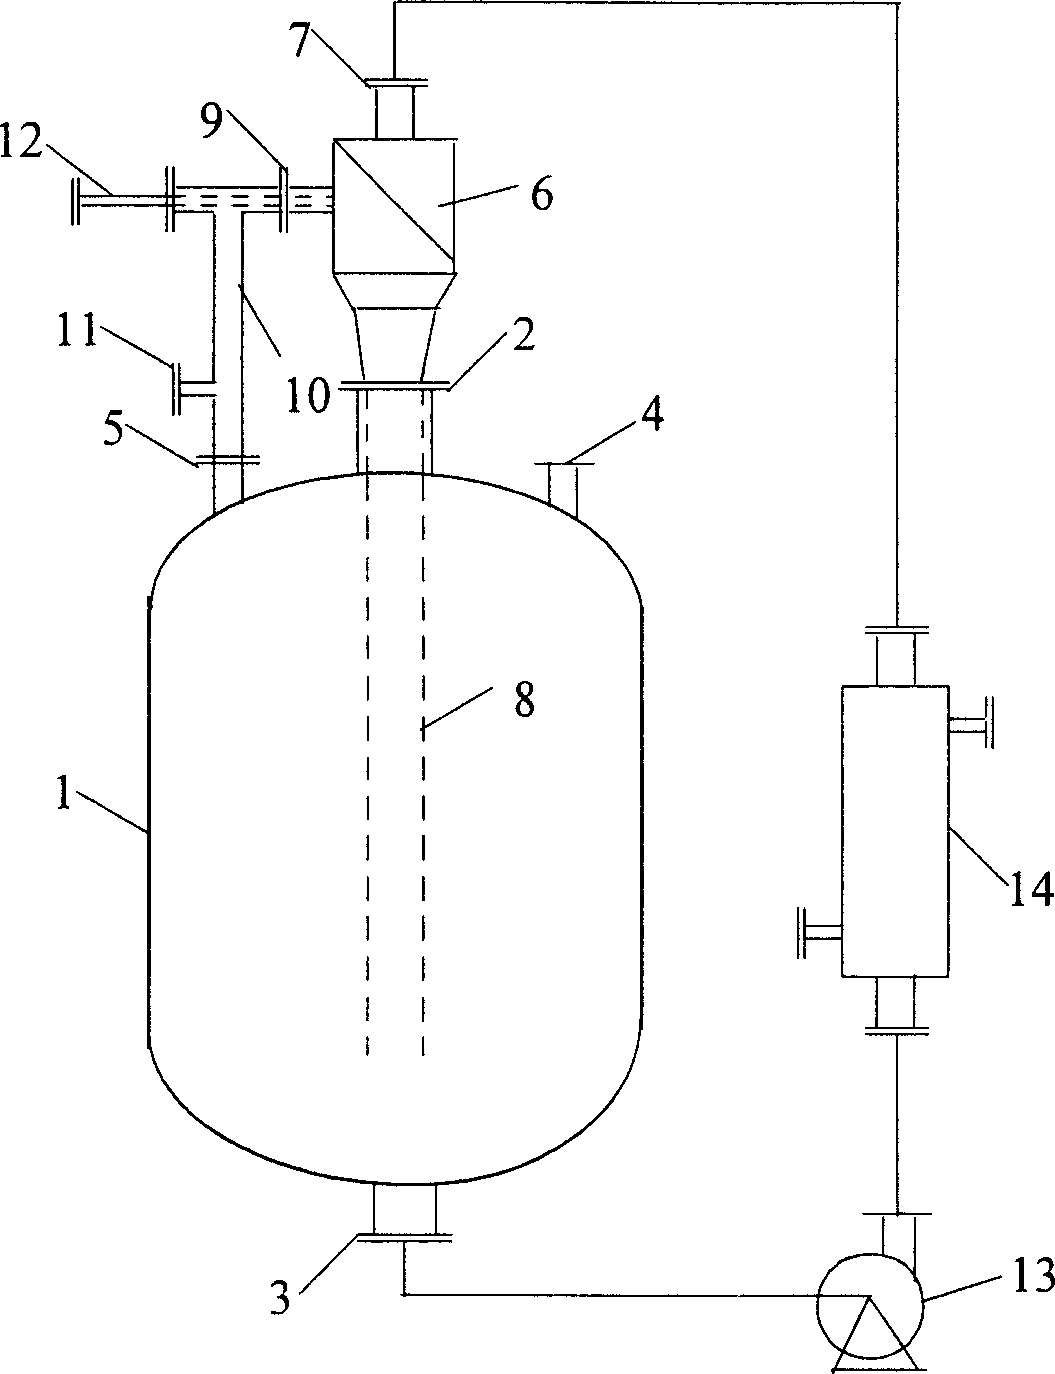 Process for preparing n-hexylic acid by oxidation of sec- octyl alcohol with nitric acid and its special device